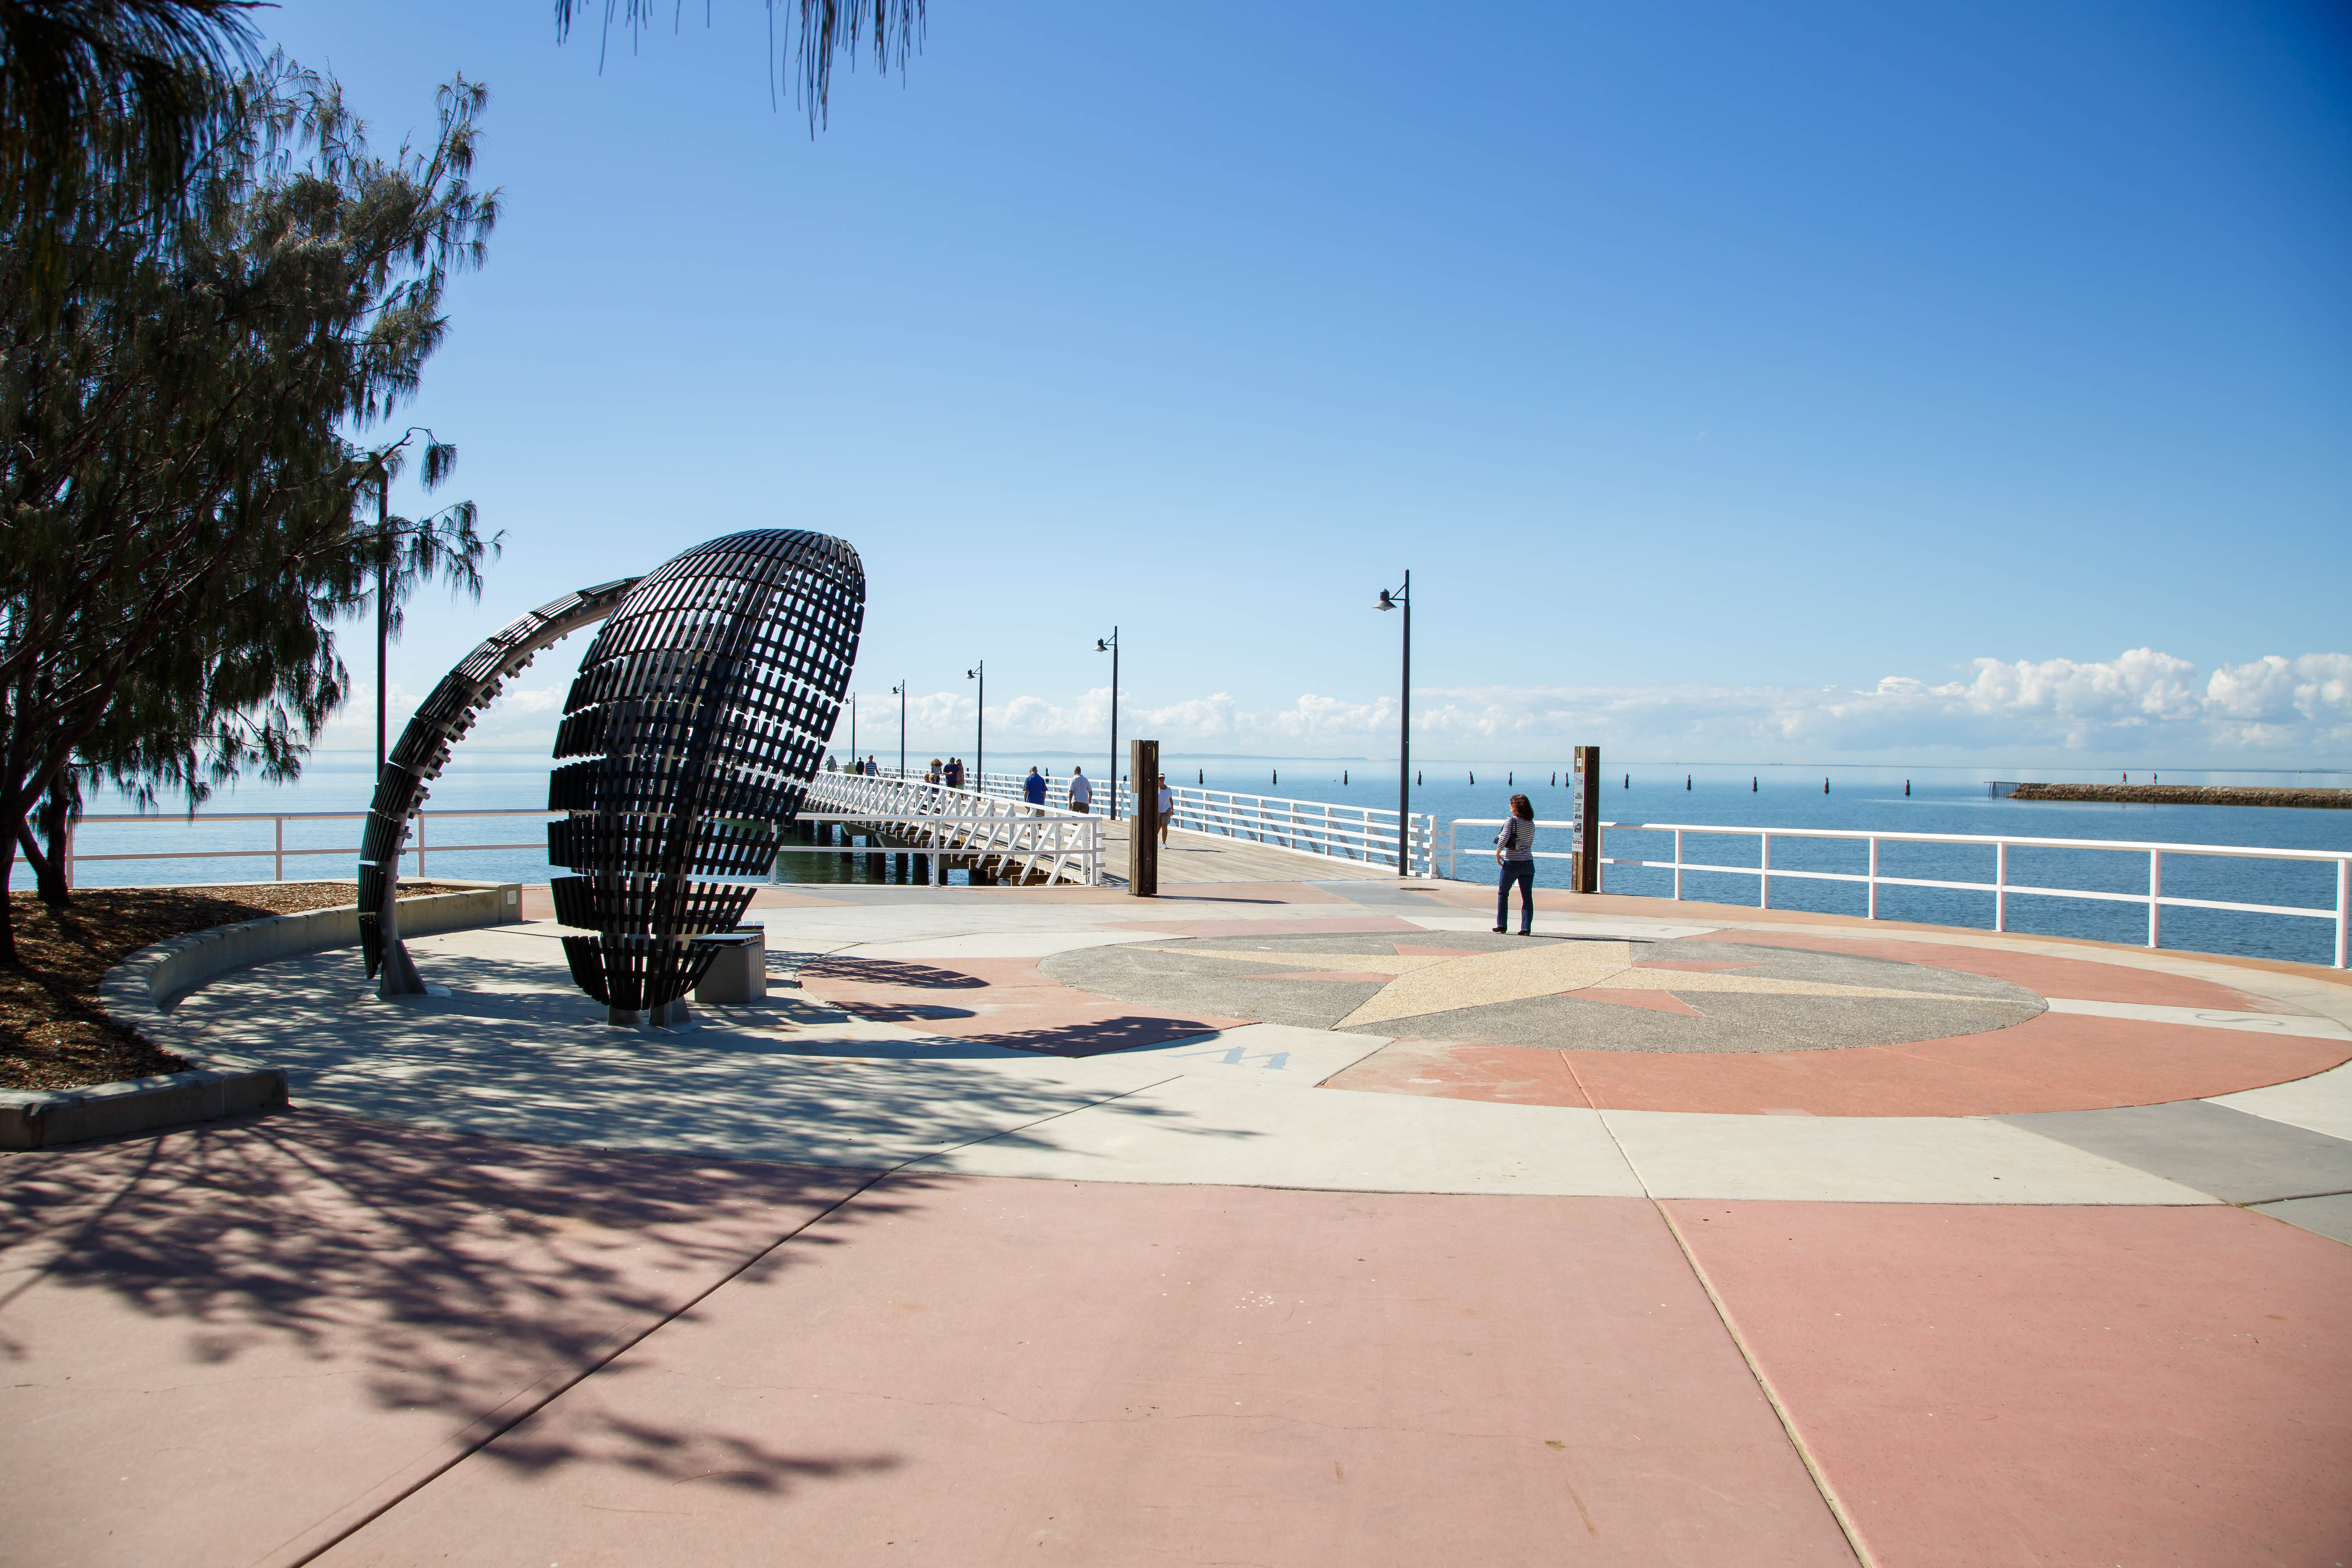 This is an image of the Bramble Bay Foreshore, Shorncliffe Pier and scultpture